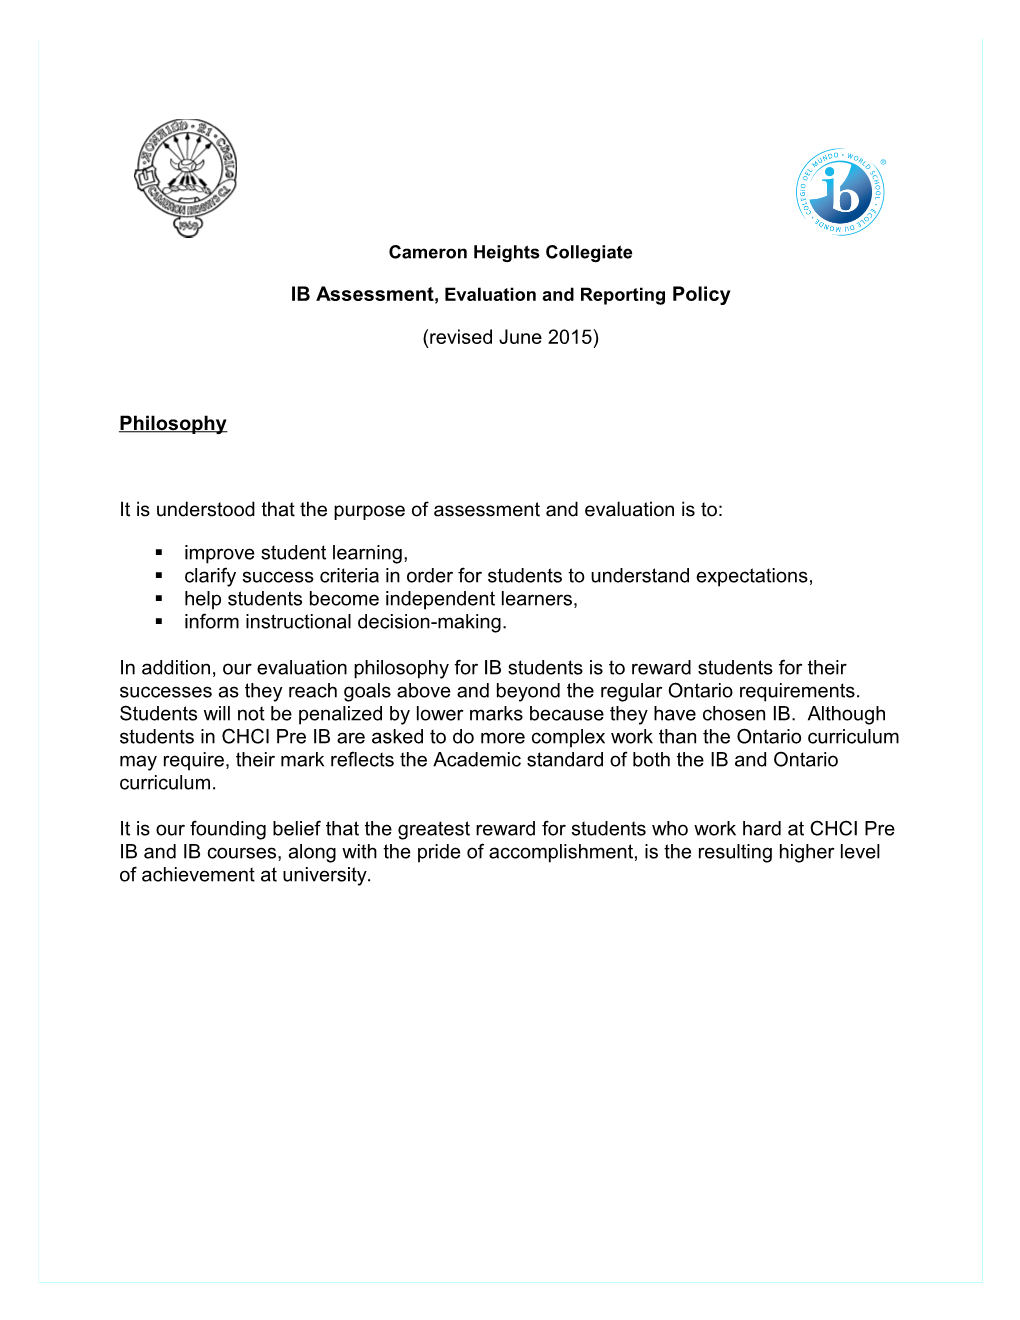 IB Assessment, Evaluation and Reporting Policy